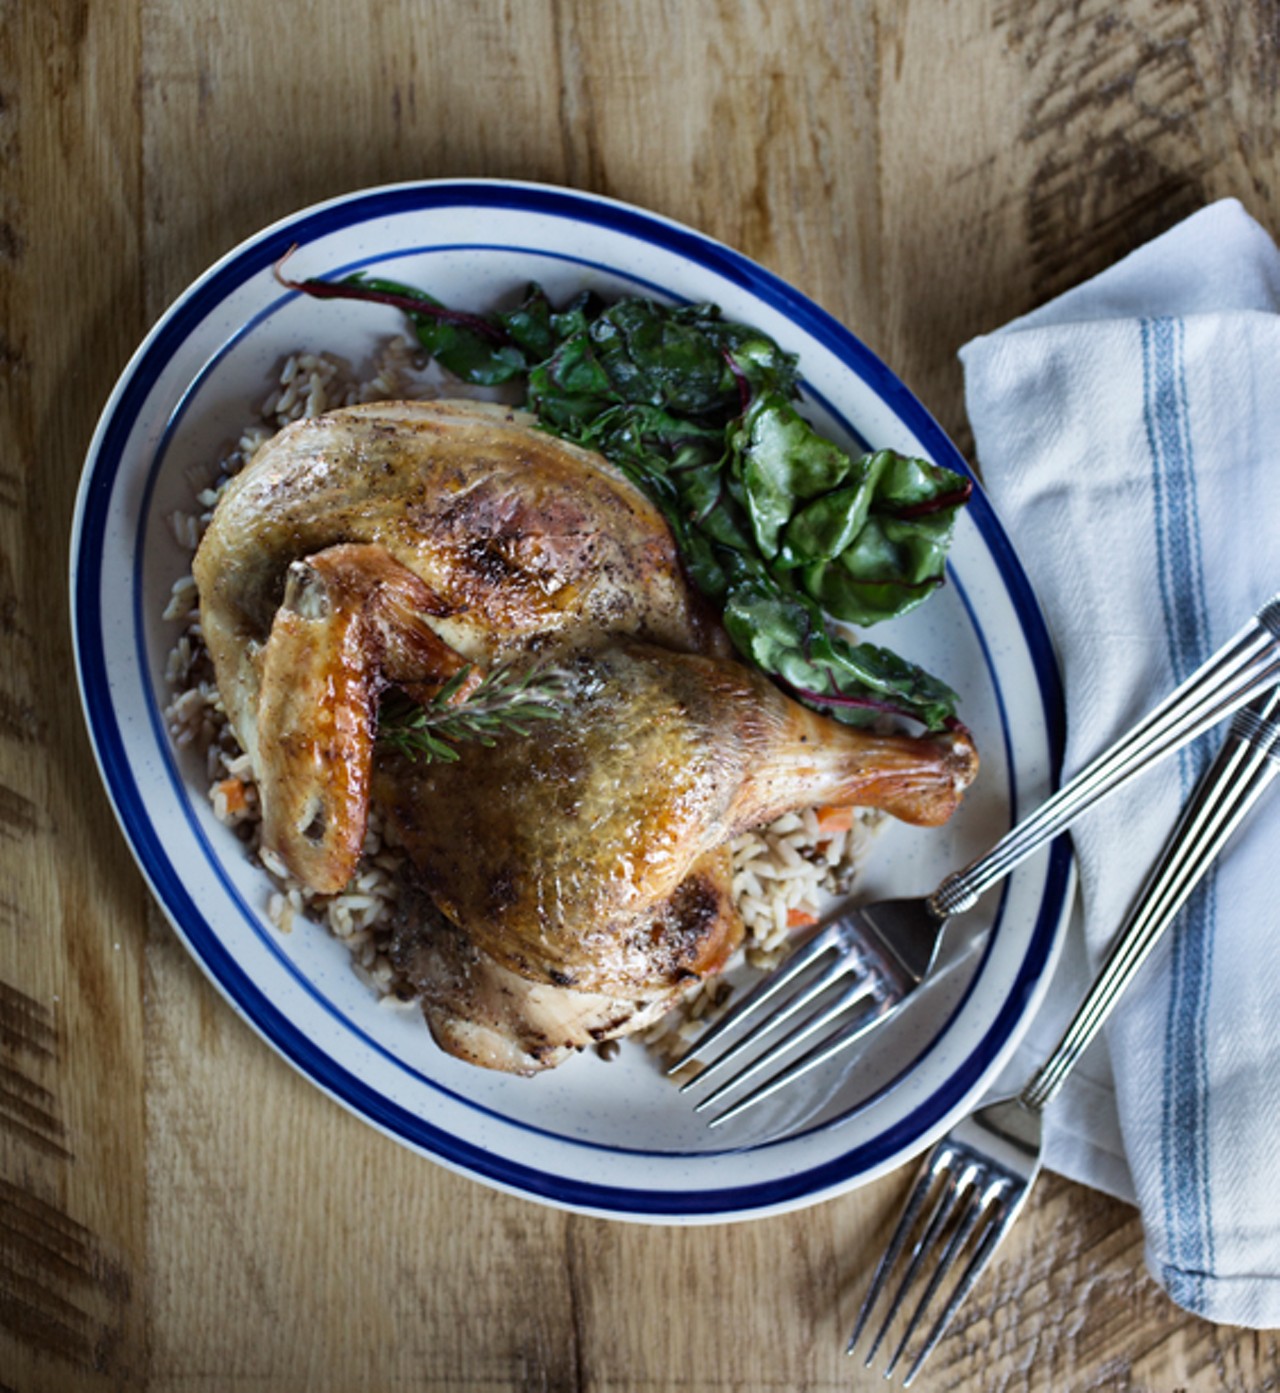 The roast chicken is Amish chicken infused with wild mushroom and truffle, French lentil and rice.